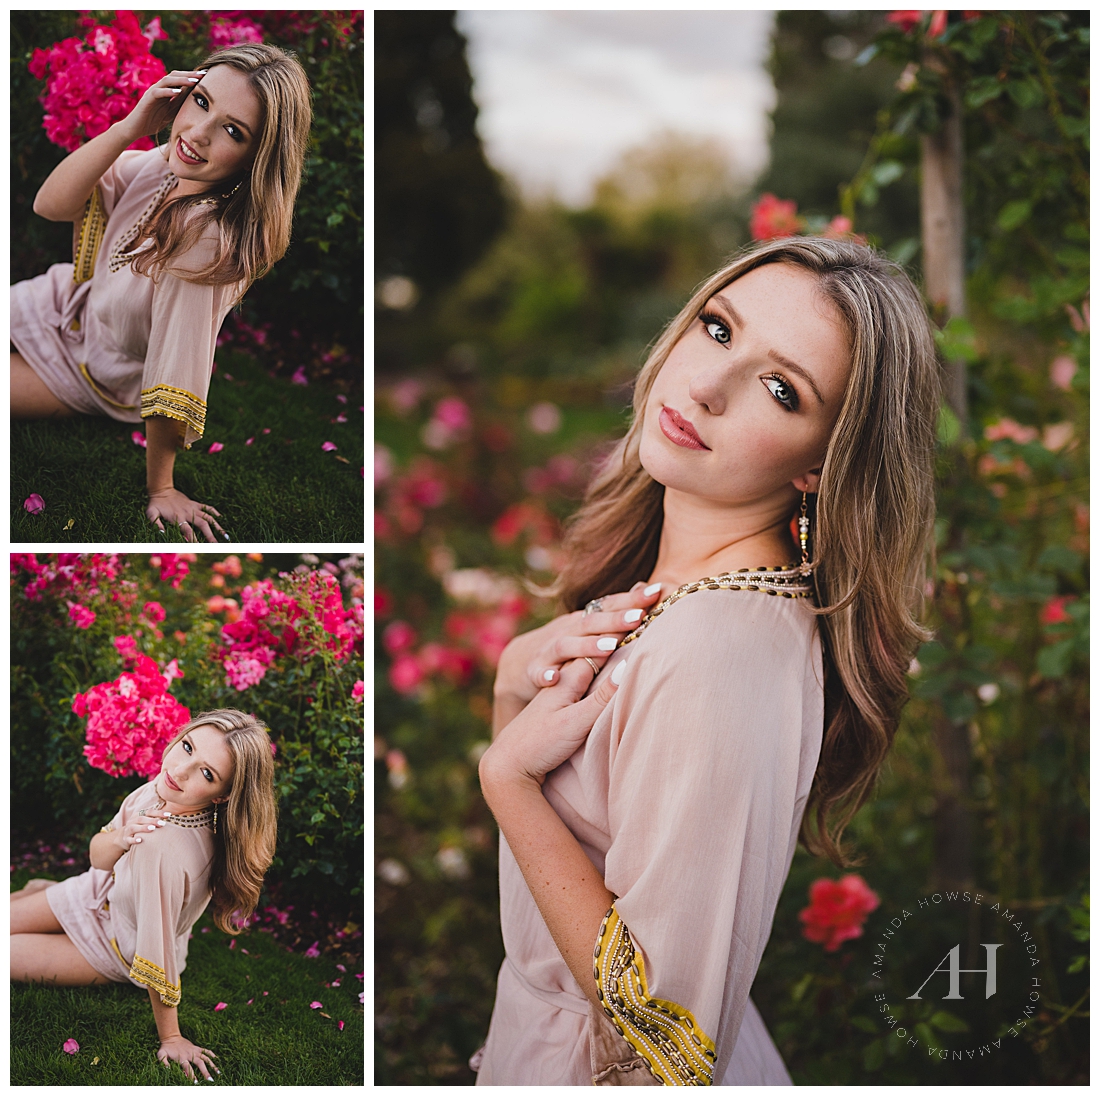 Darling Senior Portraits in Rose Garden | Flirty Florals, Vintage Sheer Dress with Gold Details | Photographed by the Best Tacoma Senior Photographer Amanda Howse Photography